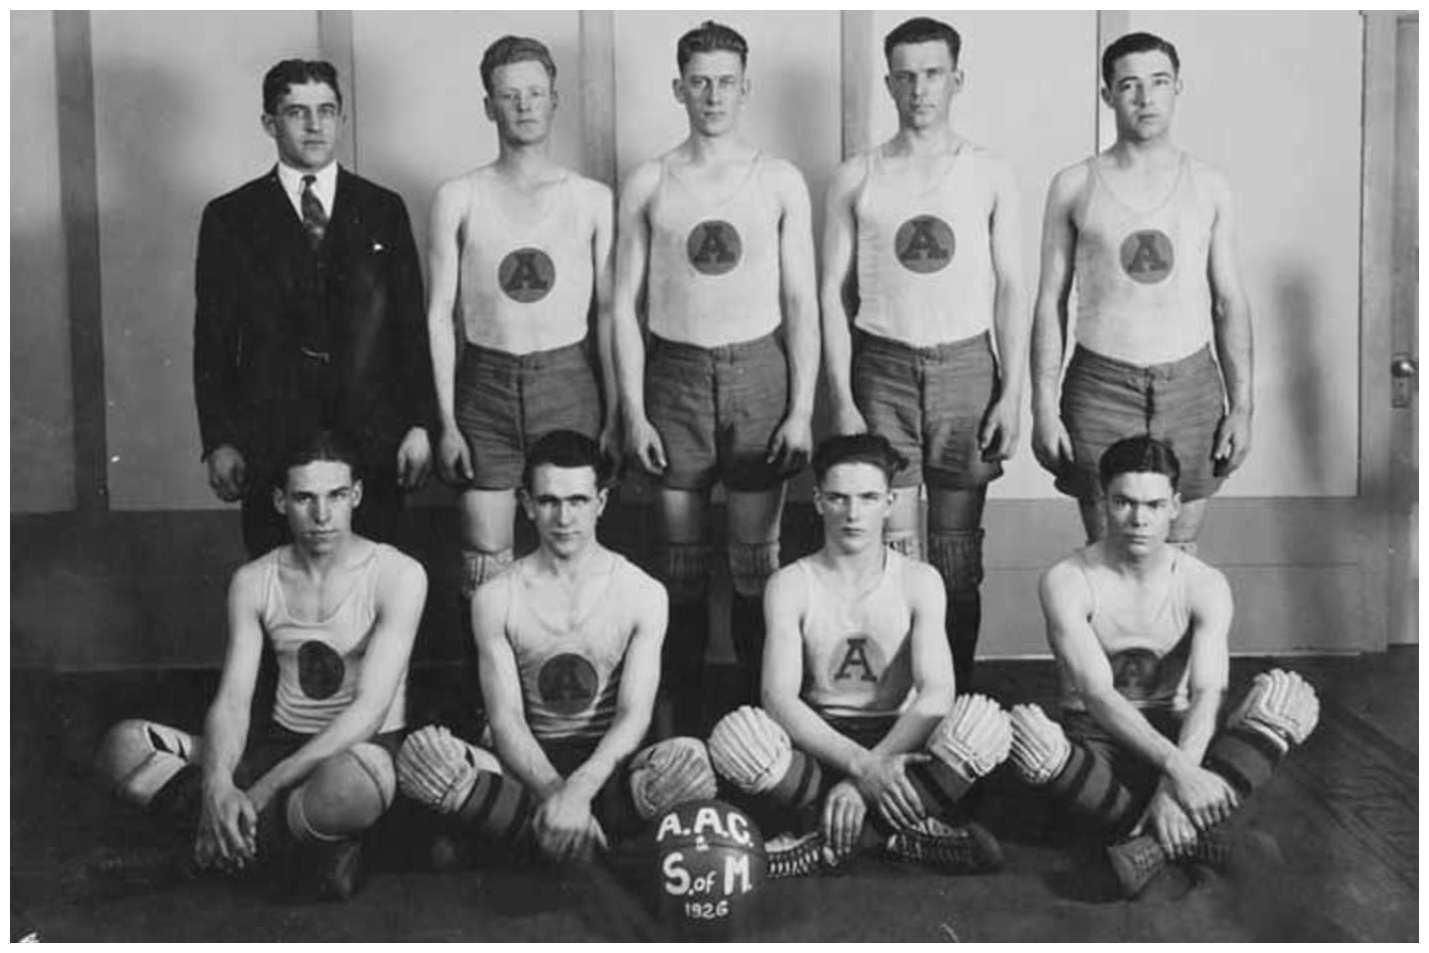 Men's basketball team 1926.  Standing from left to right: Abel (coach), Reed, T. Loftus, A. Loftus, G. Lingo. Sitting: R. Boyd, R. Anderson, D. MacDonald and J. Boswell.